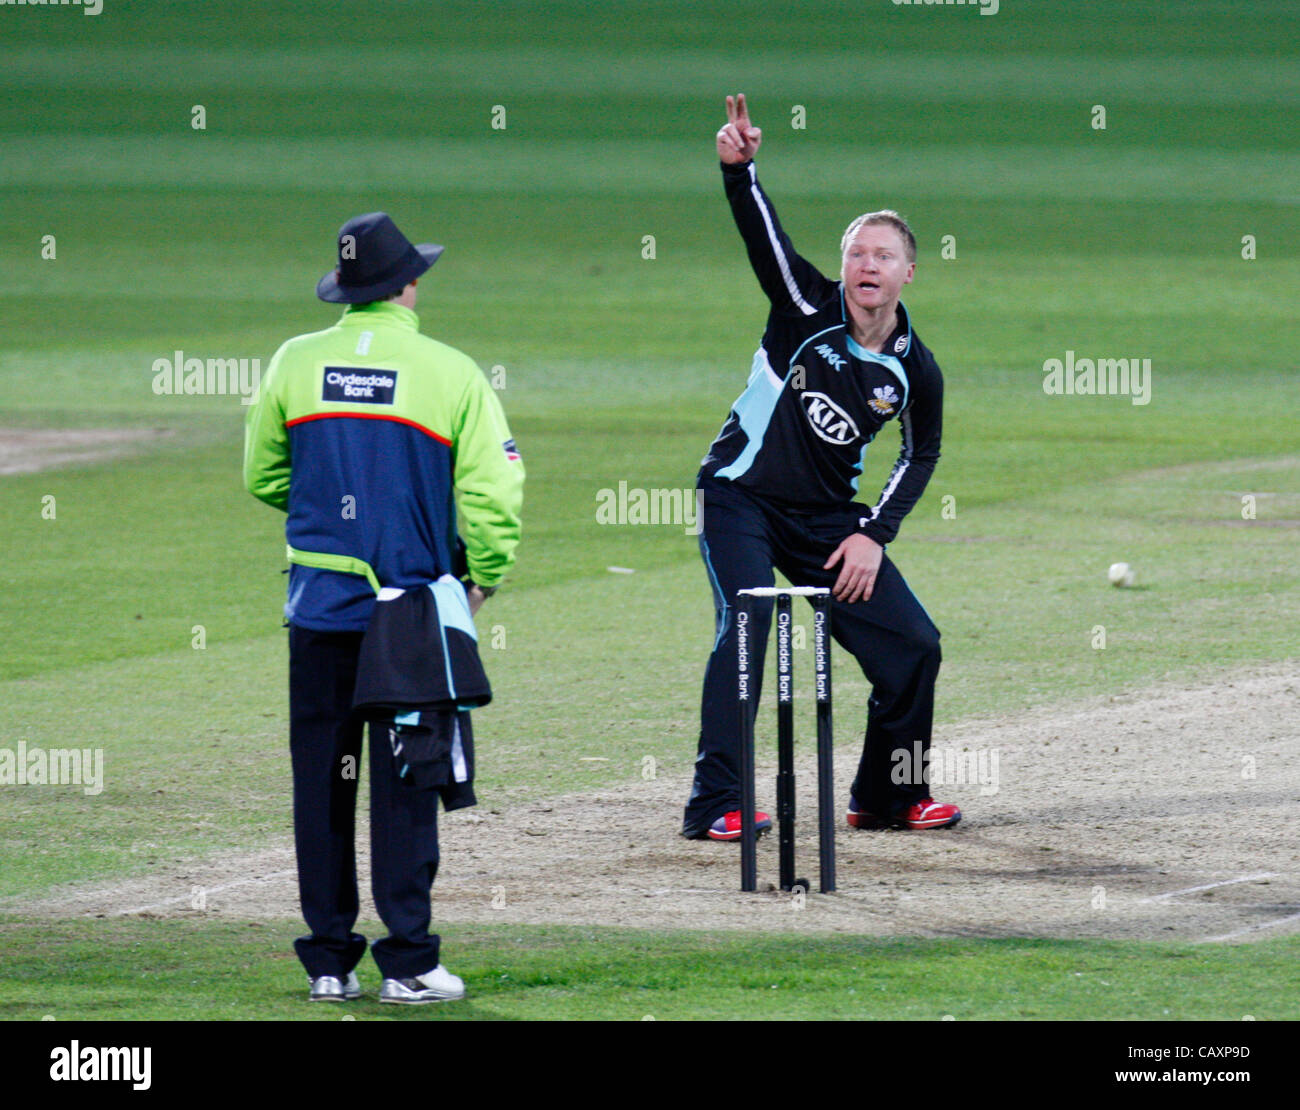 04.05.2012. Brit Oval, London, England. Gareth Batty of Surrey County Cricket claims LBW not given during the Clydesdale Bank Pro40 match between Surrey and Somerset  at The Brit Oval on May 04, 2012 in London, England. Stock Photo